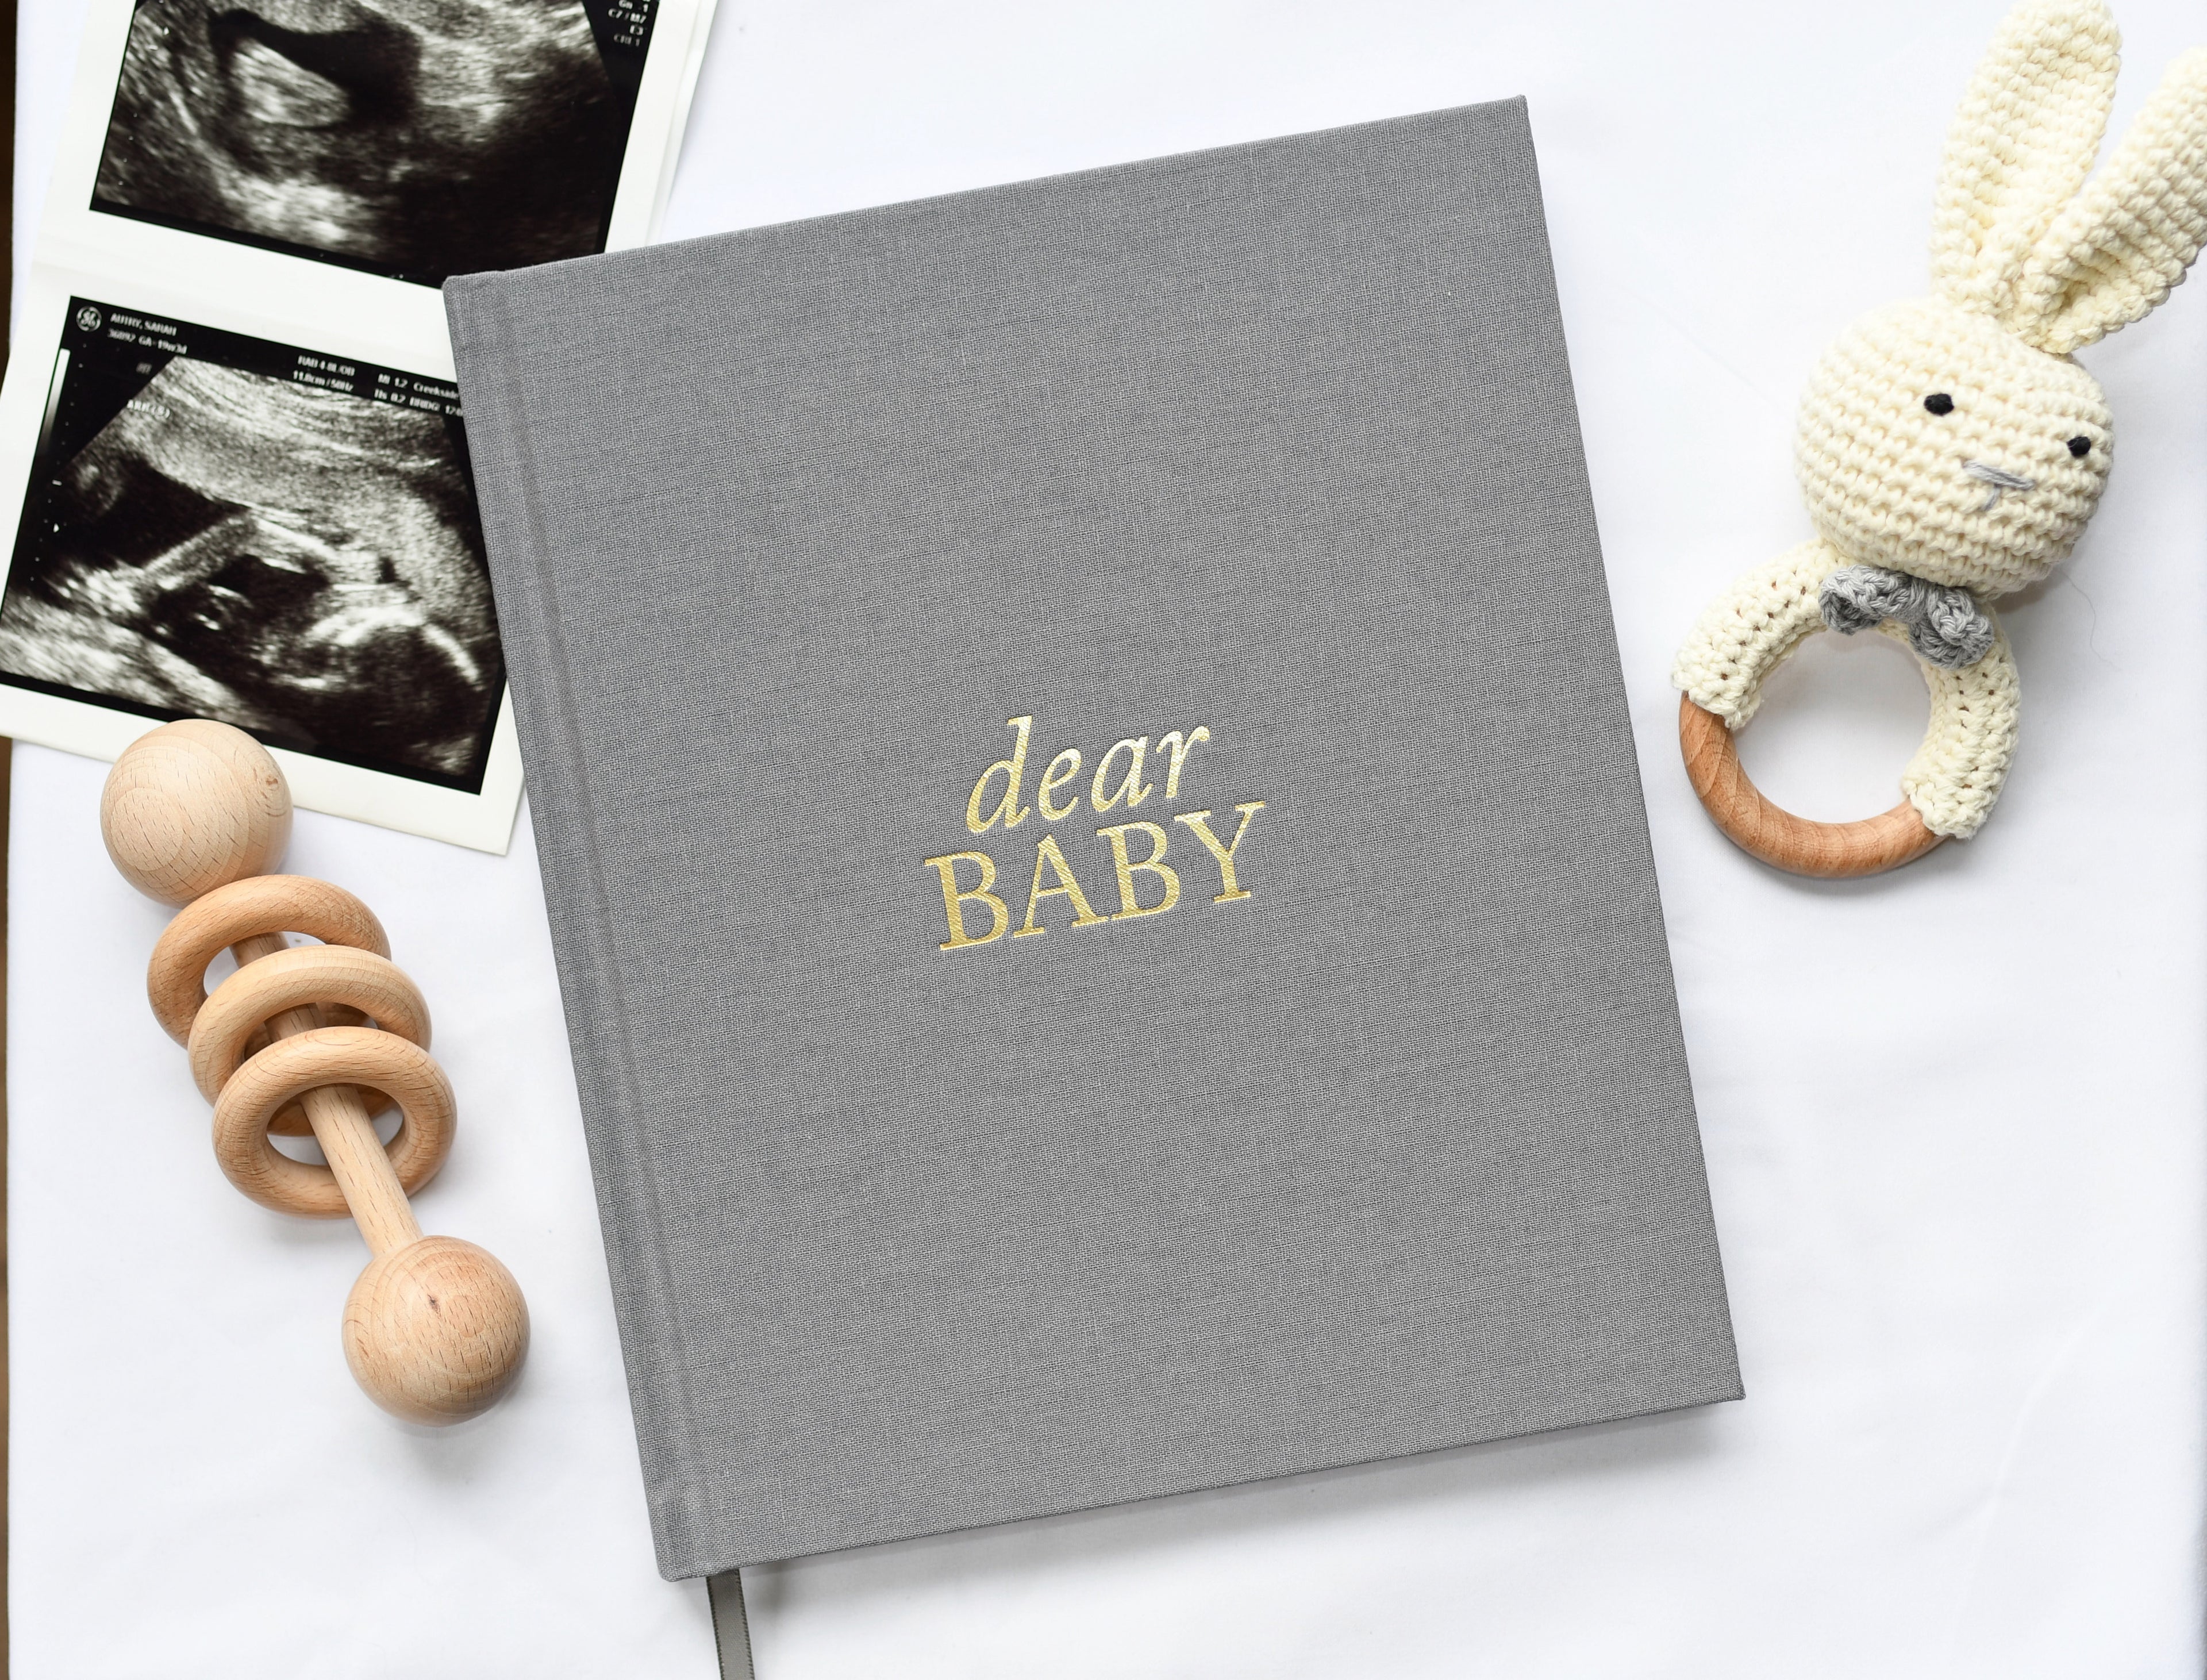 Dear Baby: A Pregnancy Prayer Journal &amp; Memory Book for Expecting Moms by Duncan &amp; Stone | Pregnancy Keepsake | Scrapbook Album for Milestones | Baby Announcement | New Mom to Be Gift